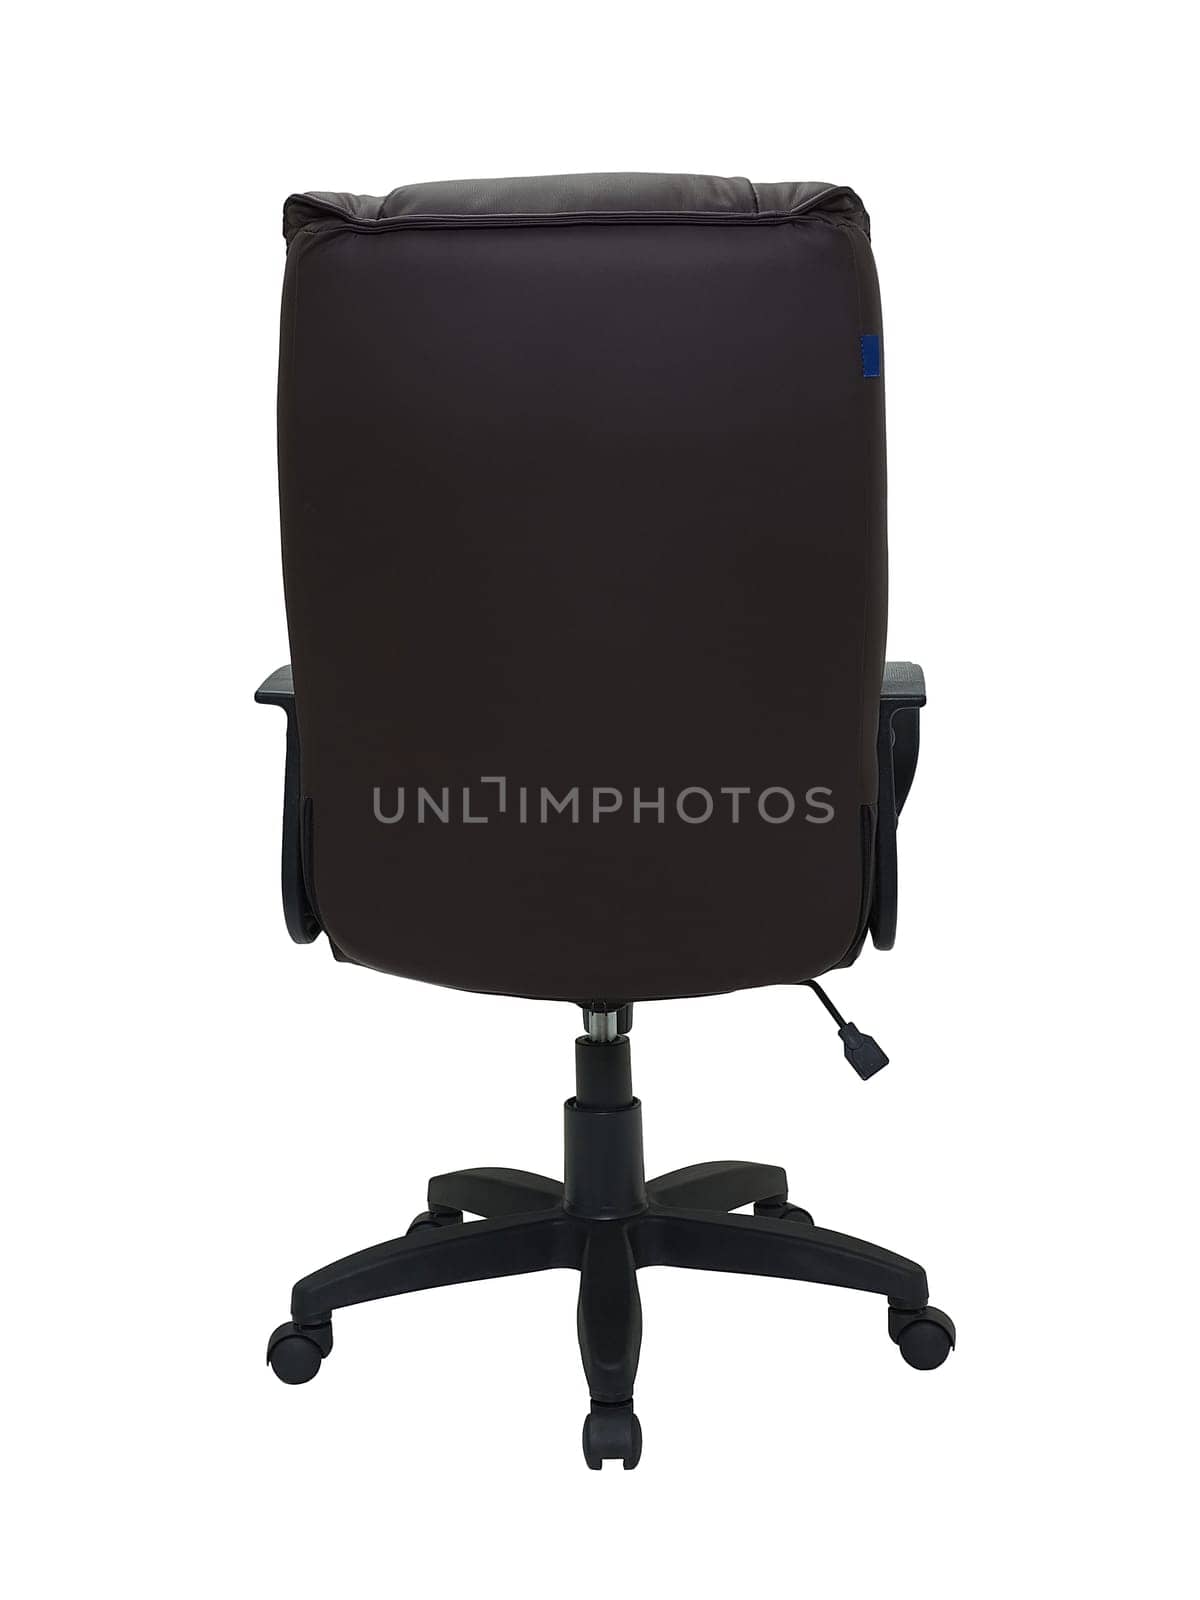 brown office armchair on wheels isolated on white background, back view by artemzatsepilin